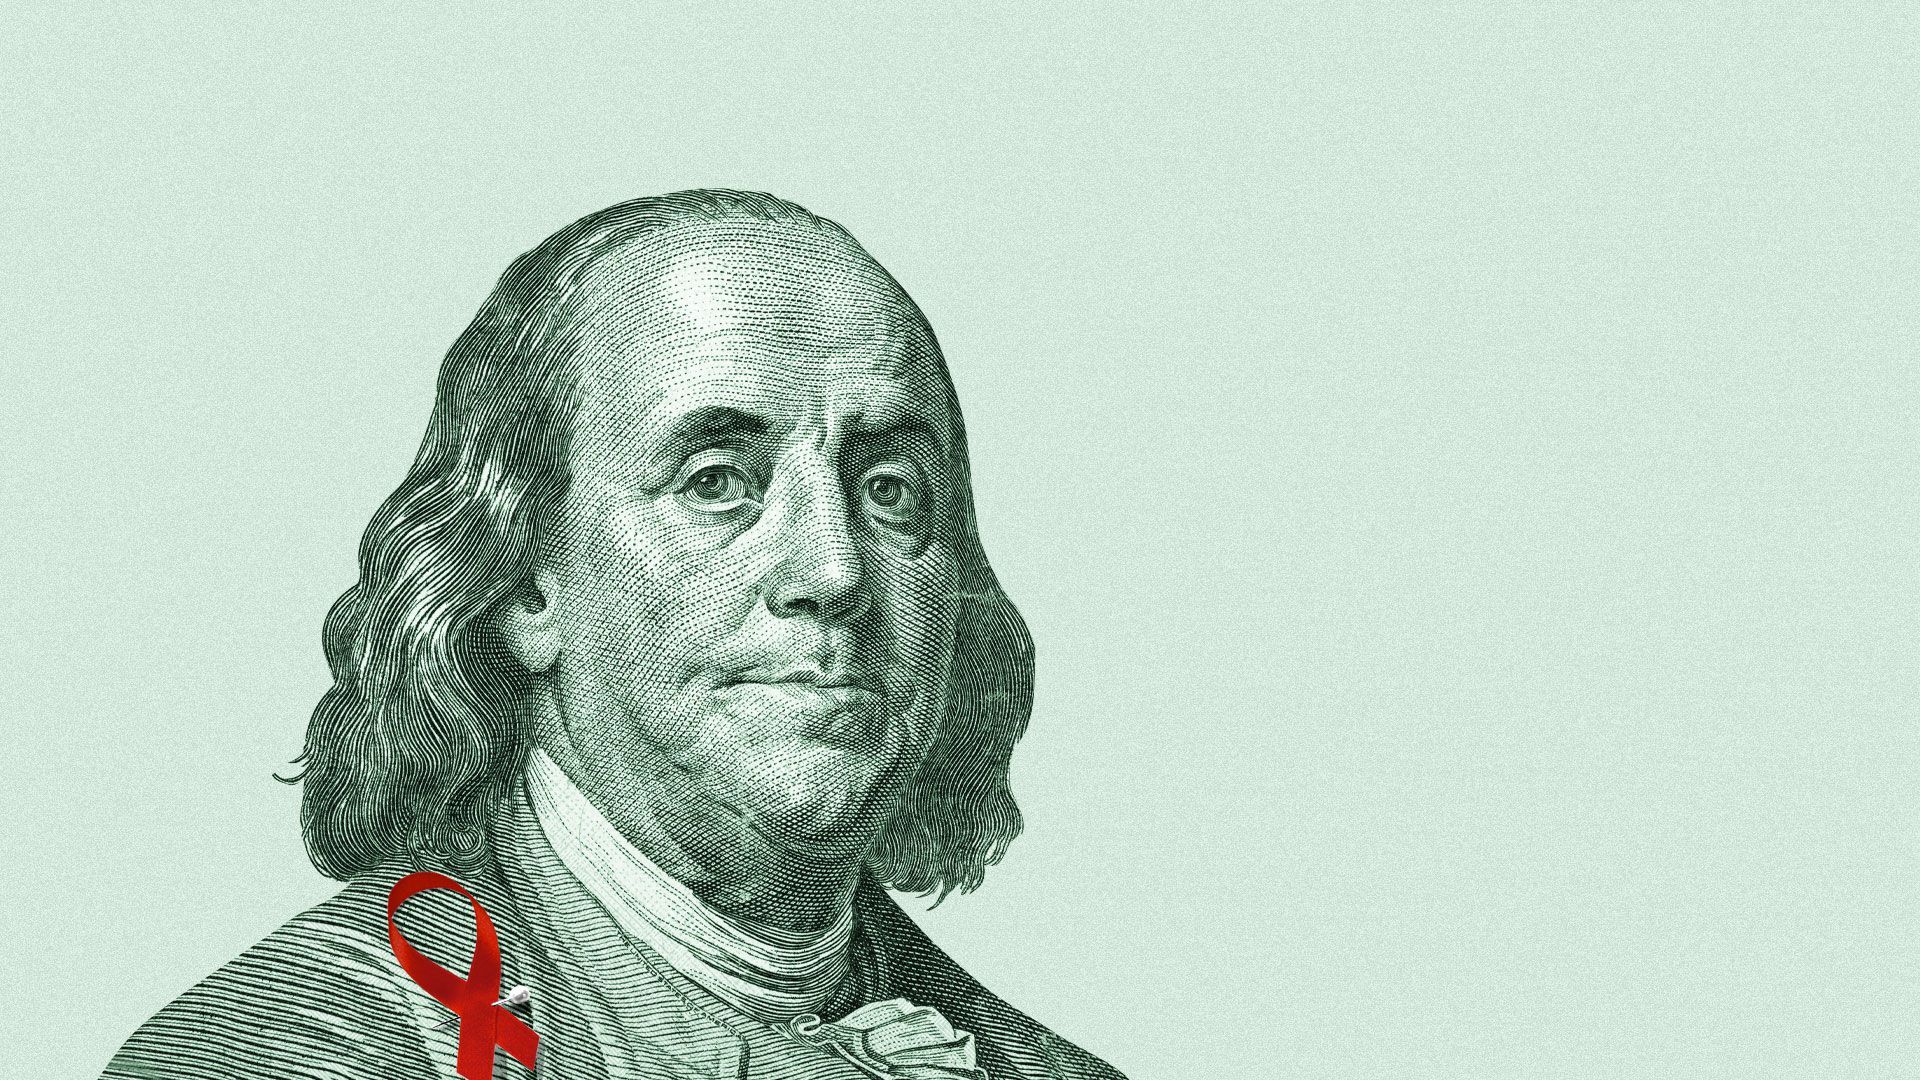 Illustration of Benjamin Franklin wearing a support/ charity ribbon